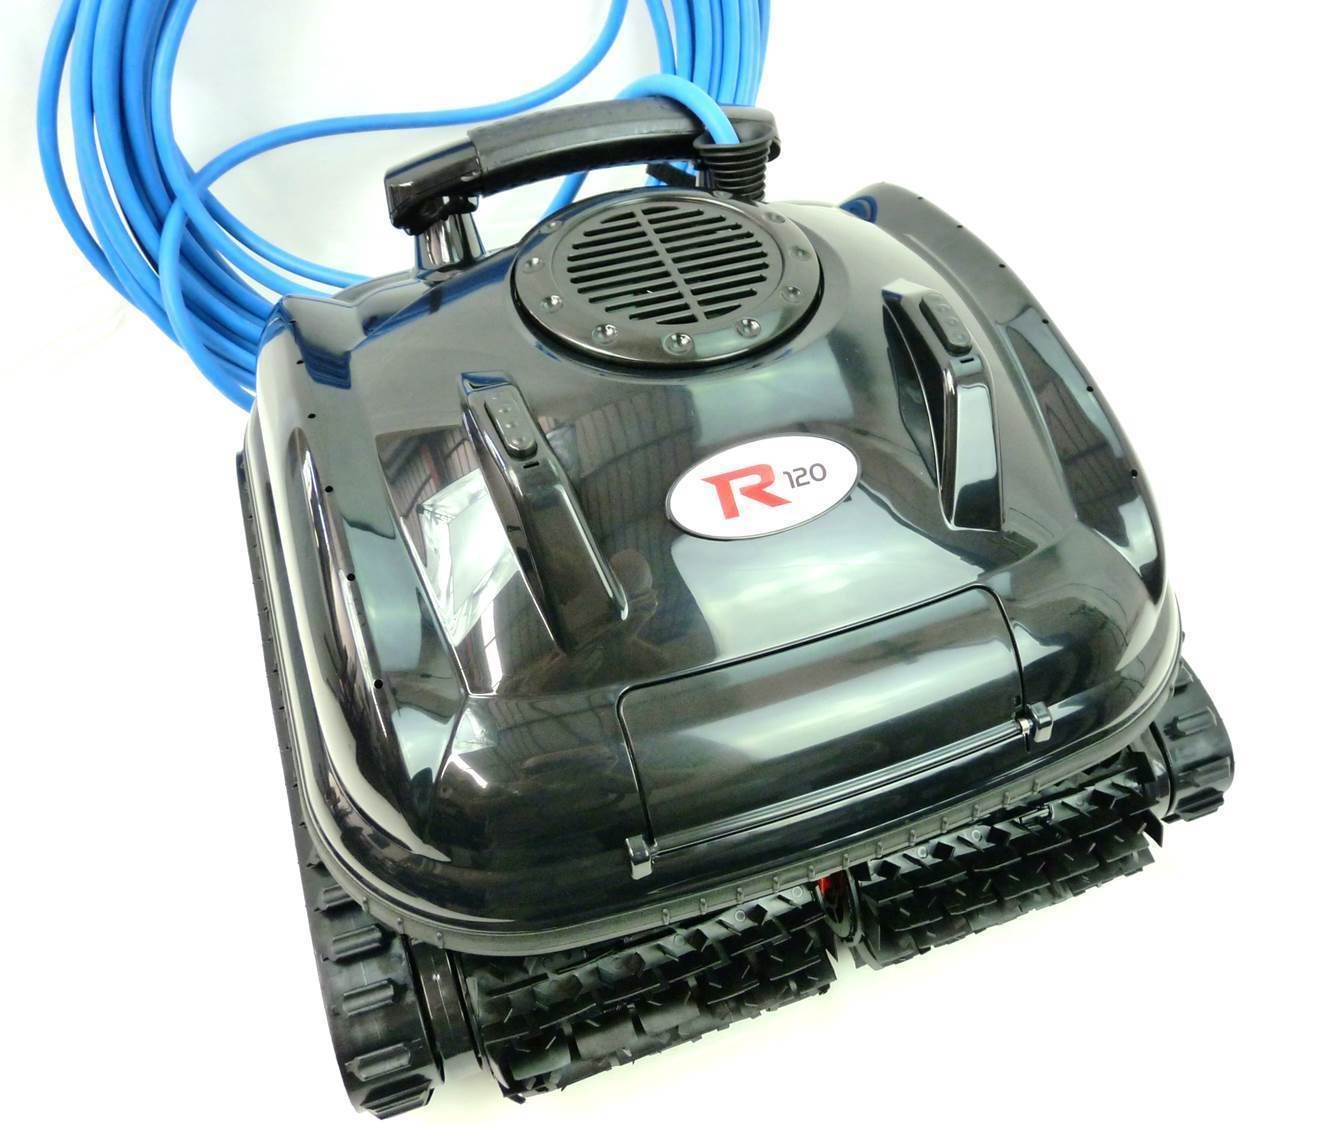 New R120 Robotic Pool Cleaner - Waterco Admiral Robot Automatic Wall Climber